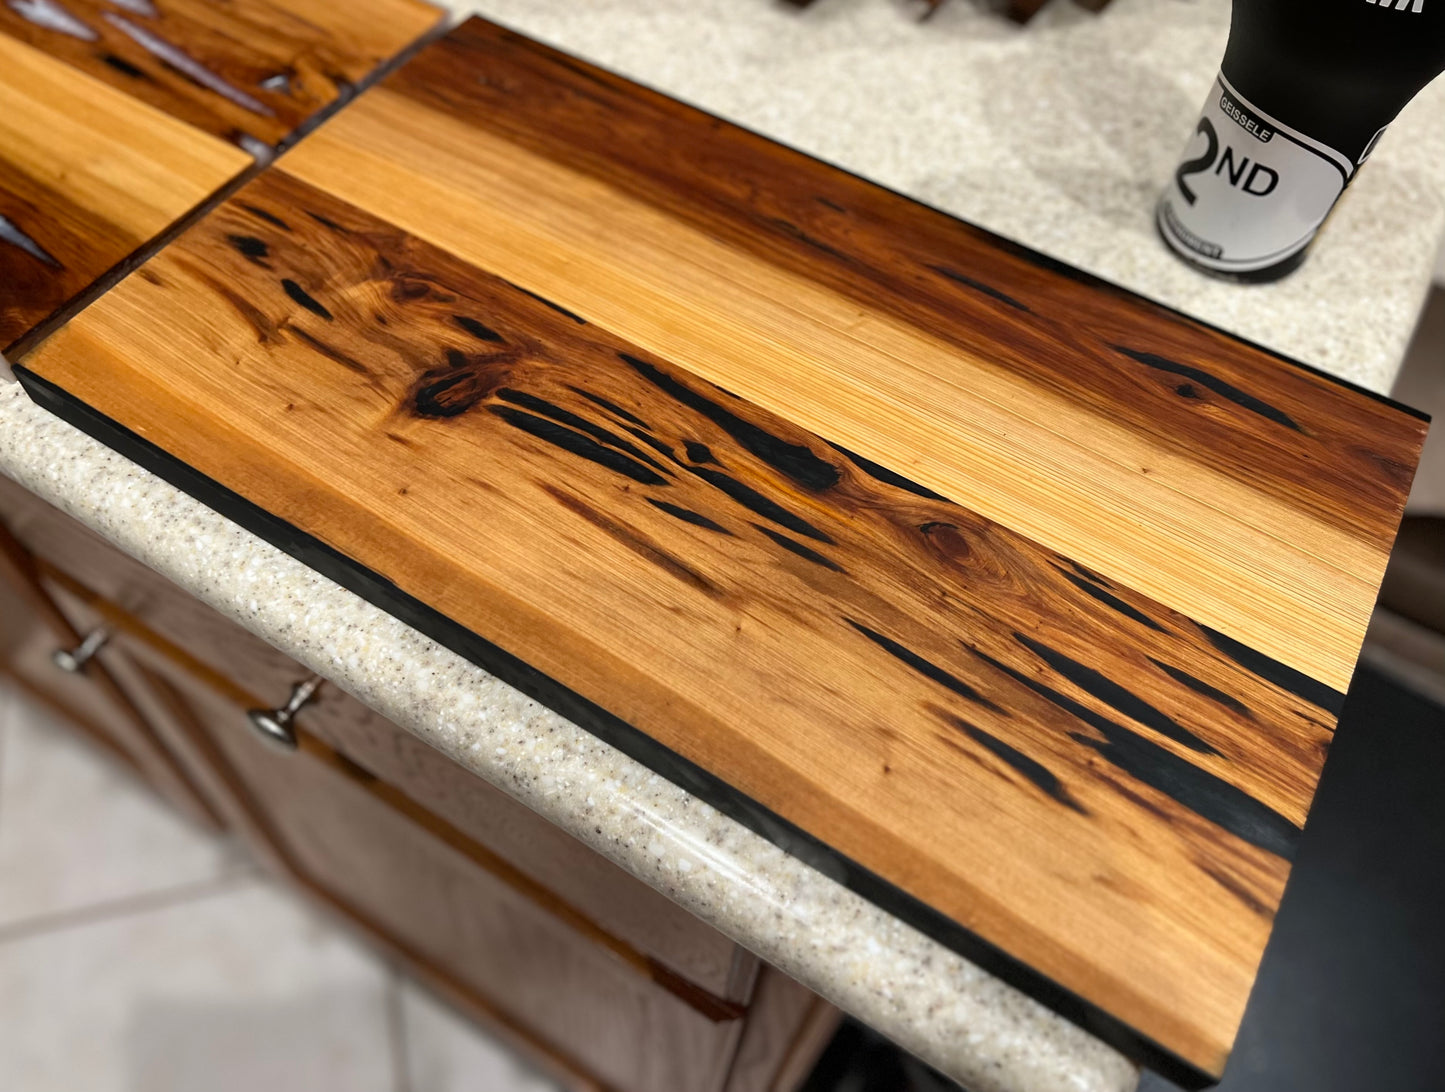 Large Epoxy Cypress Serving and Charcuterie Board